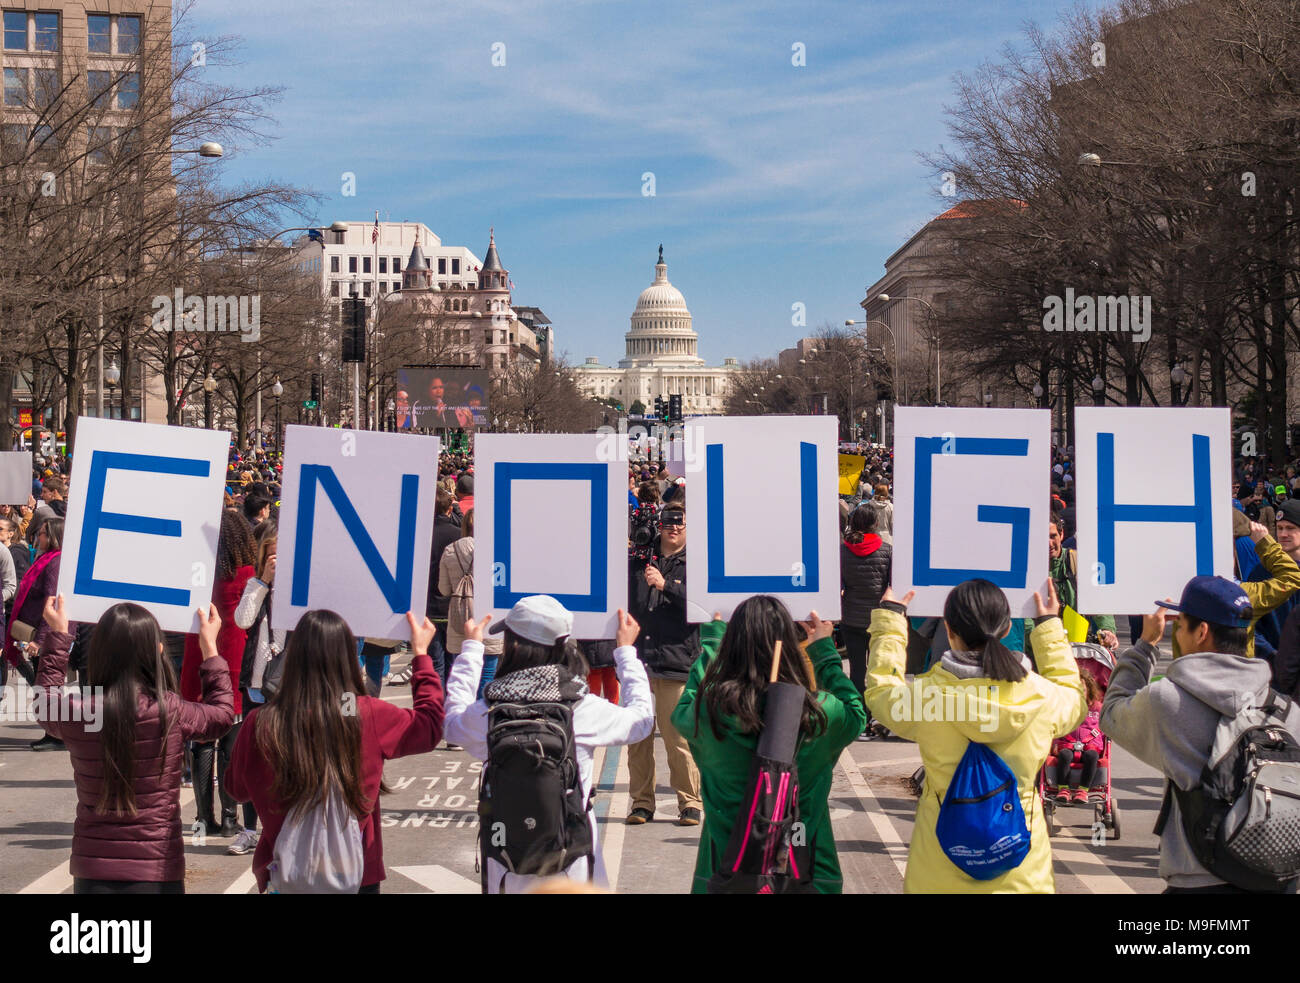 WASHINGTON, DC, USA - March for Our Lives demonstration, protesting gun violence. People hold ENOUGH signs. Stock Photo